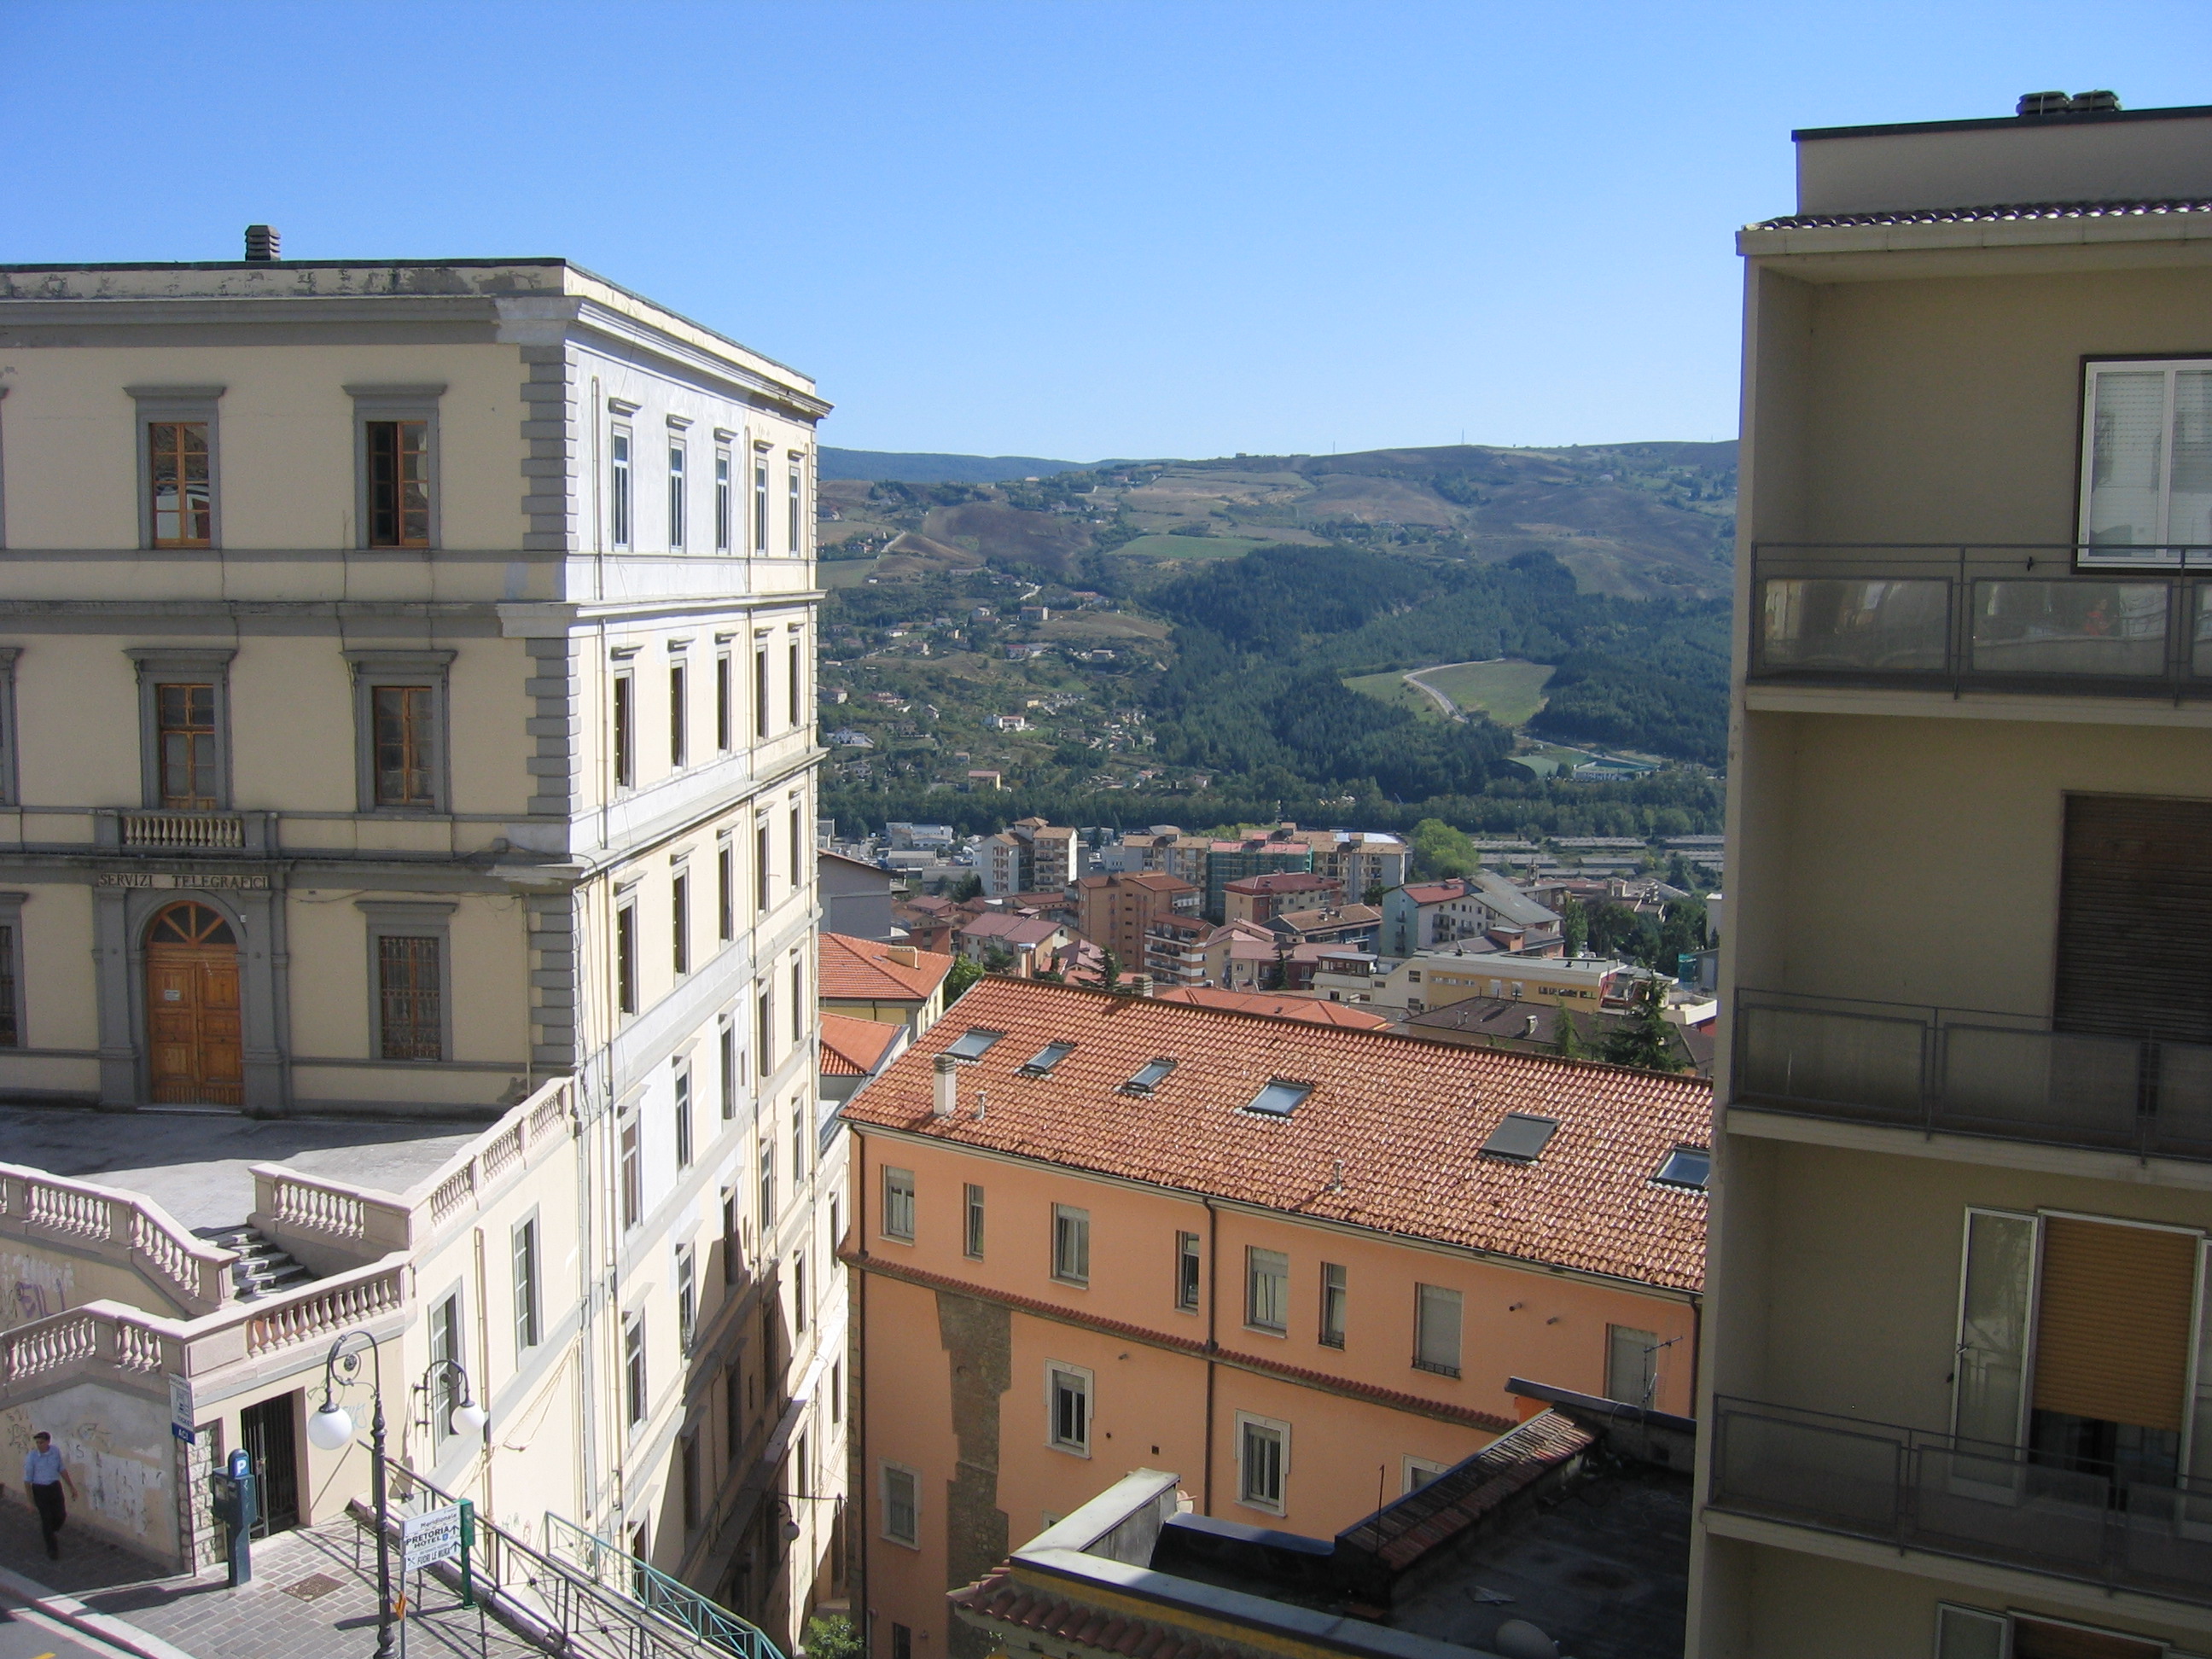 View of Potenza